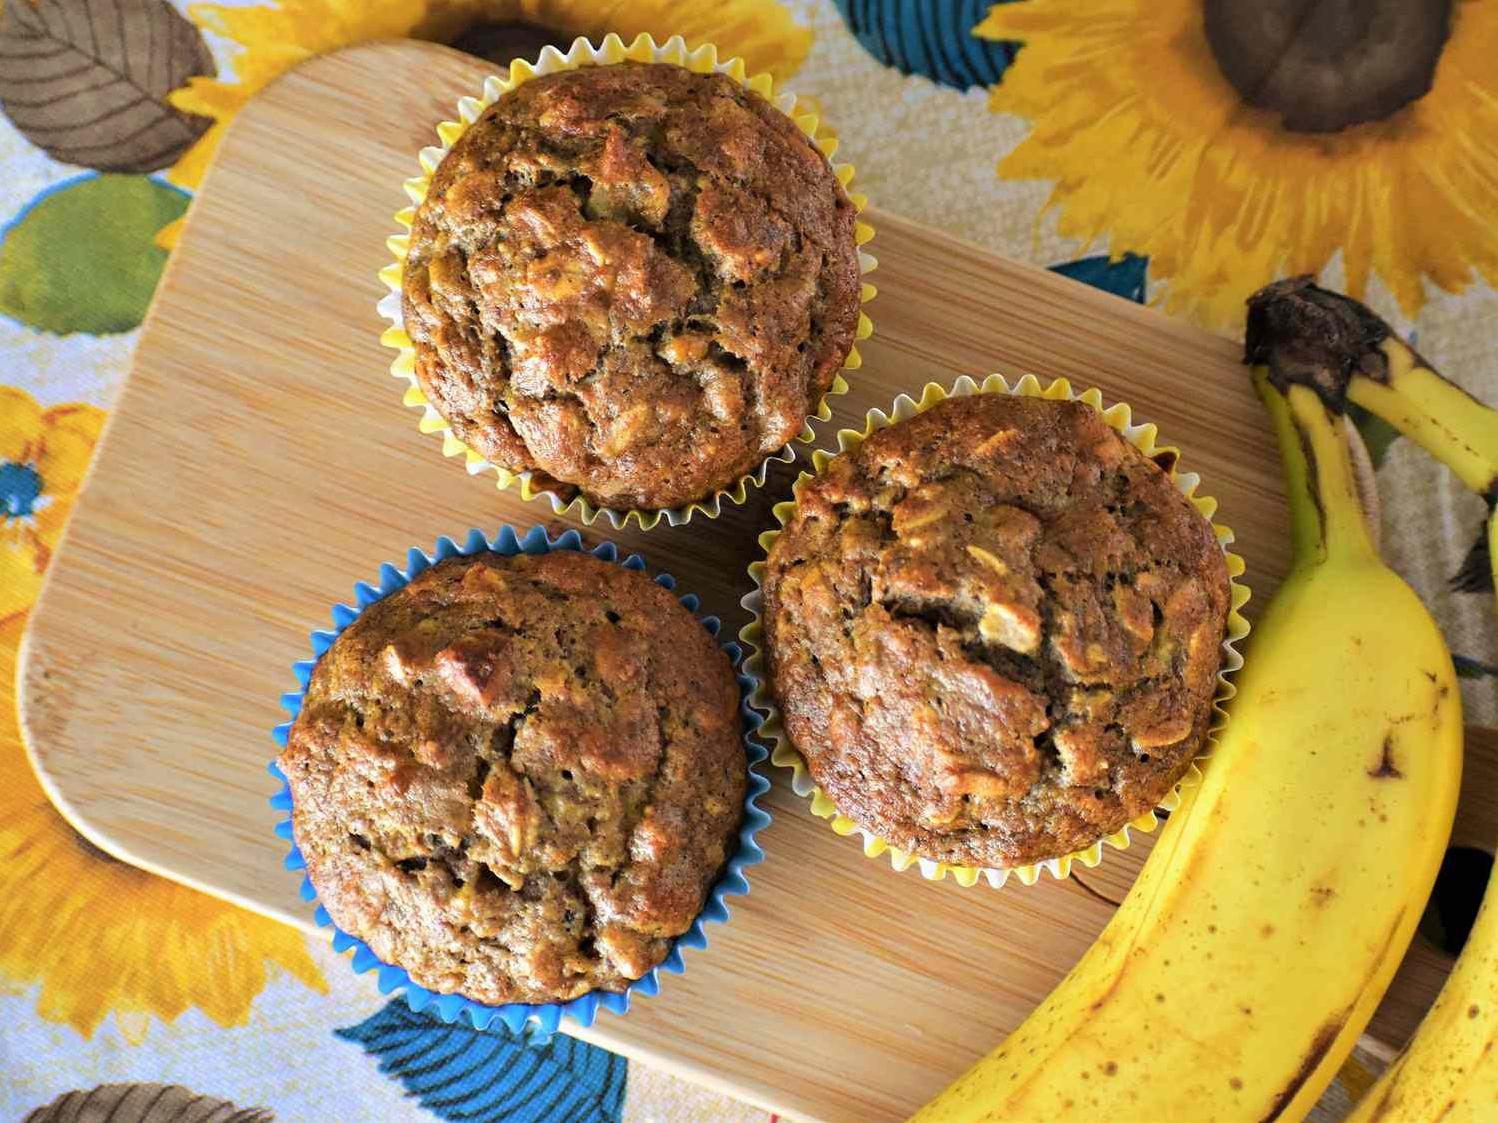  Can you smell the aroma of these freshly baked dairy-free muffins wafting through your home?